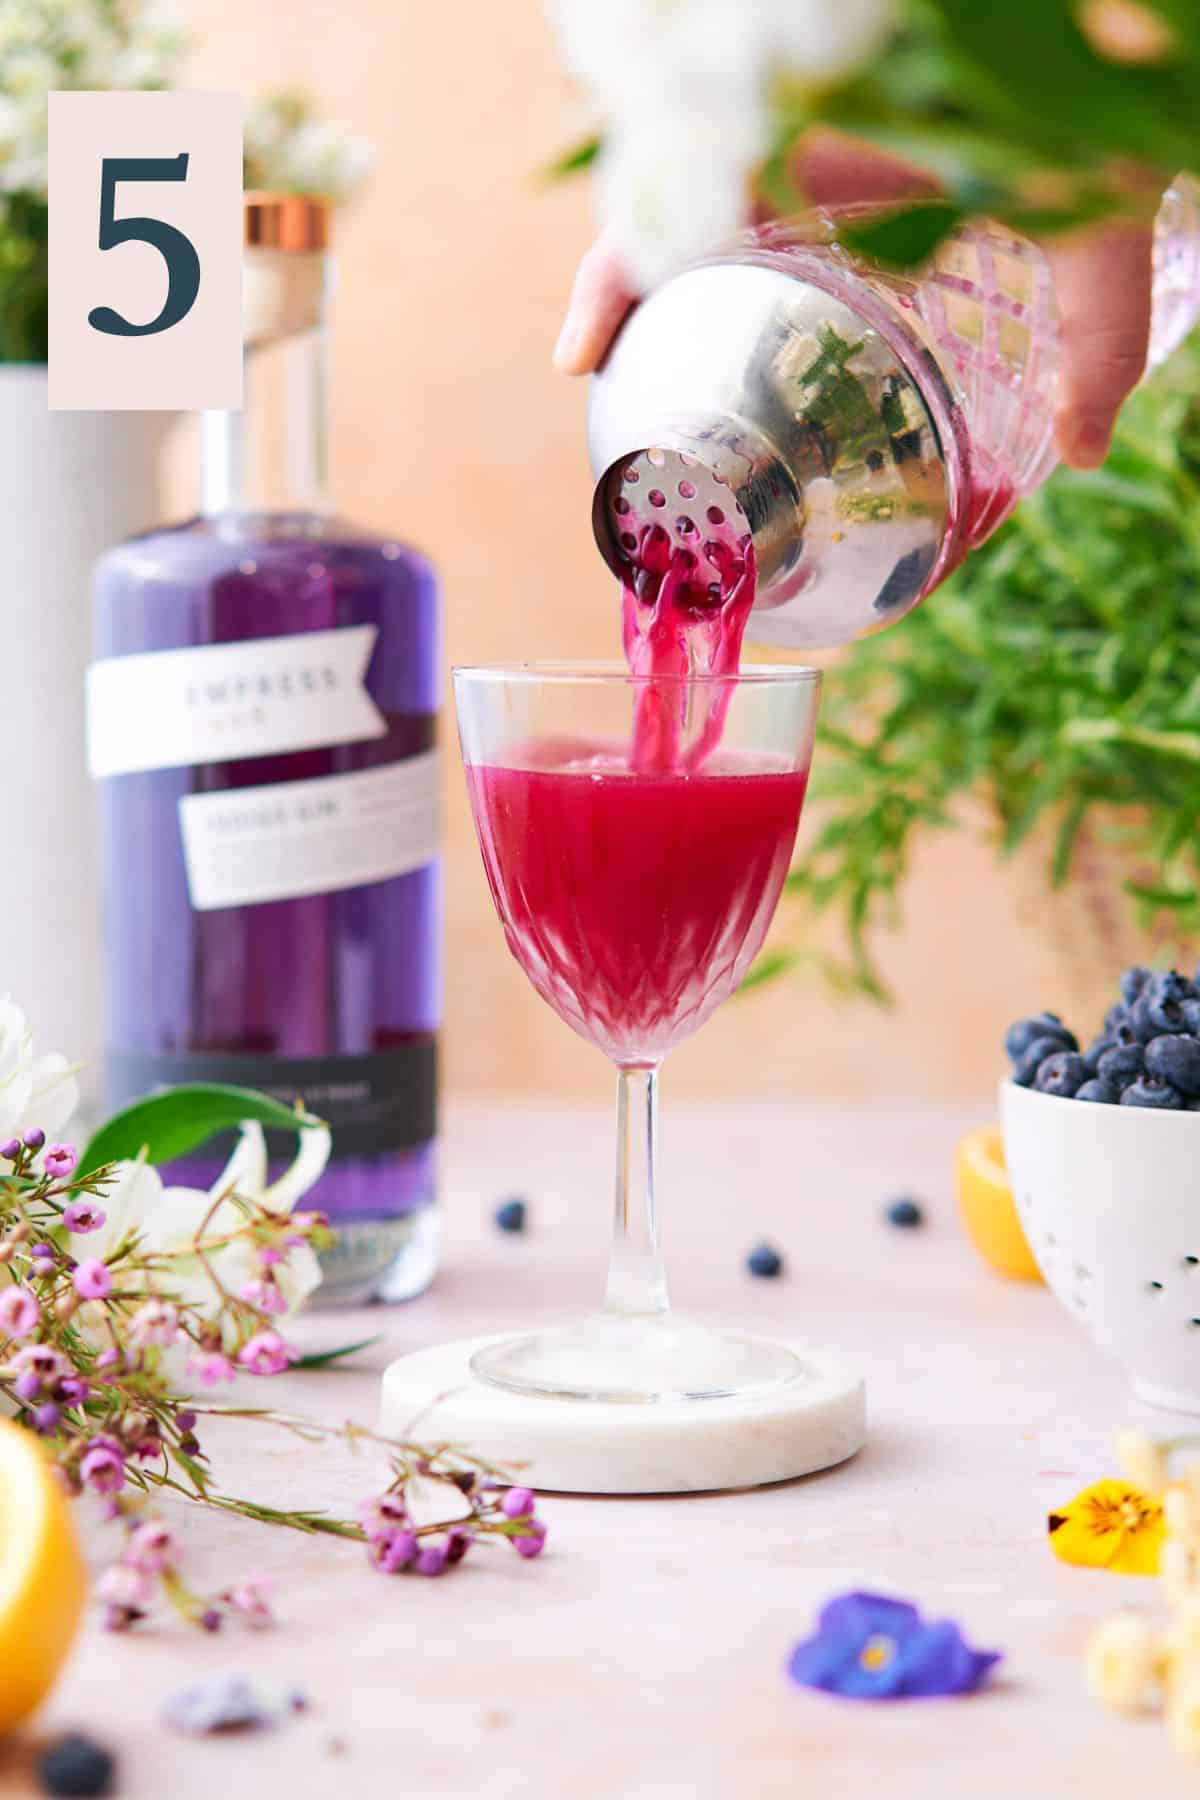 pouring a vibrant blueberry cocktail into a chilled cocktail glass, with a bottle of Empress in the background.